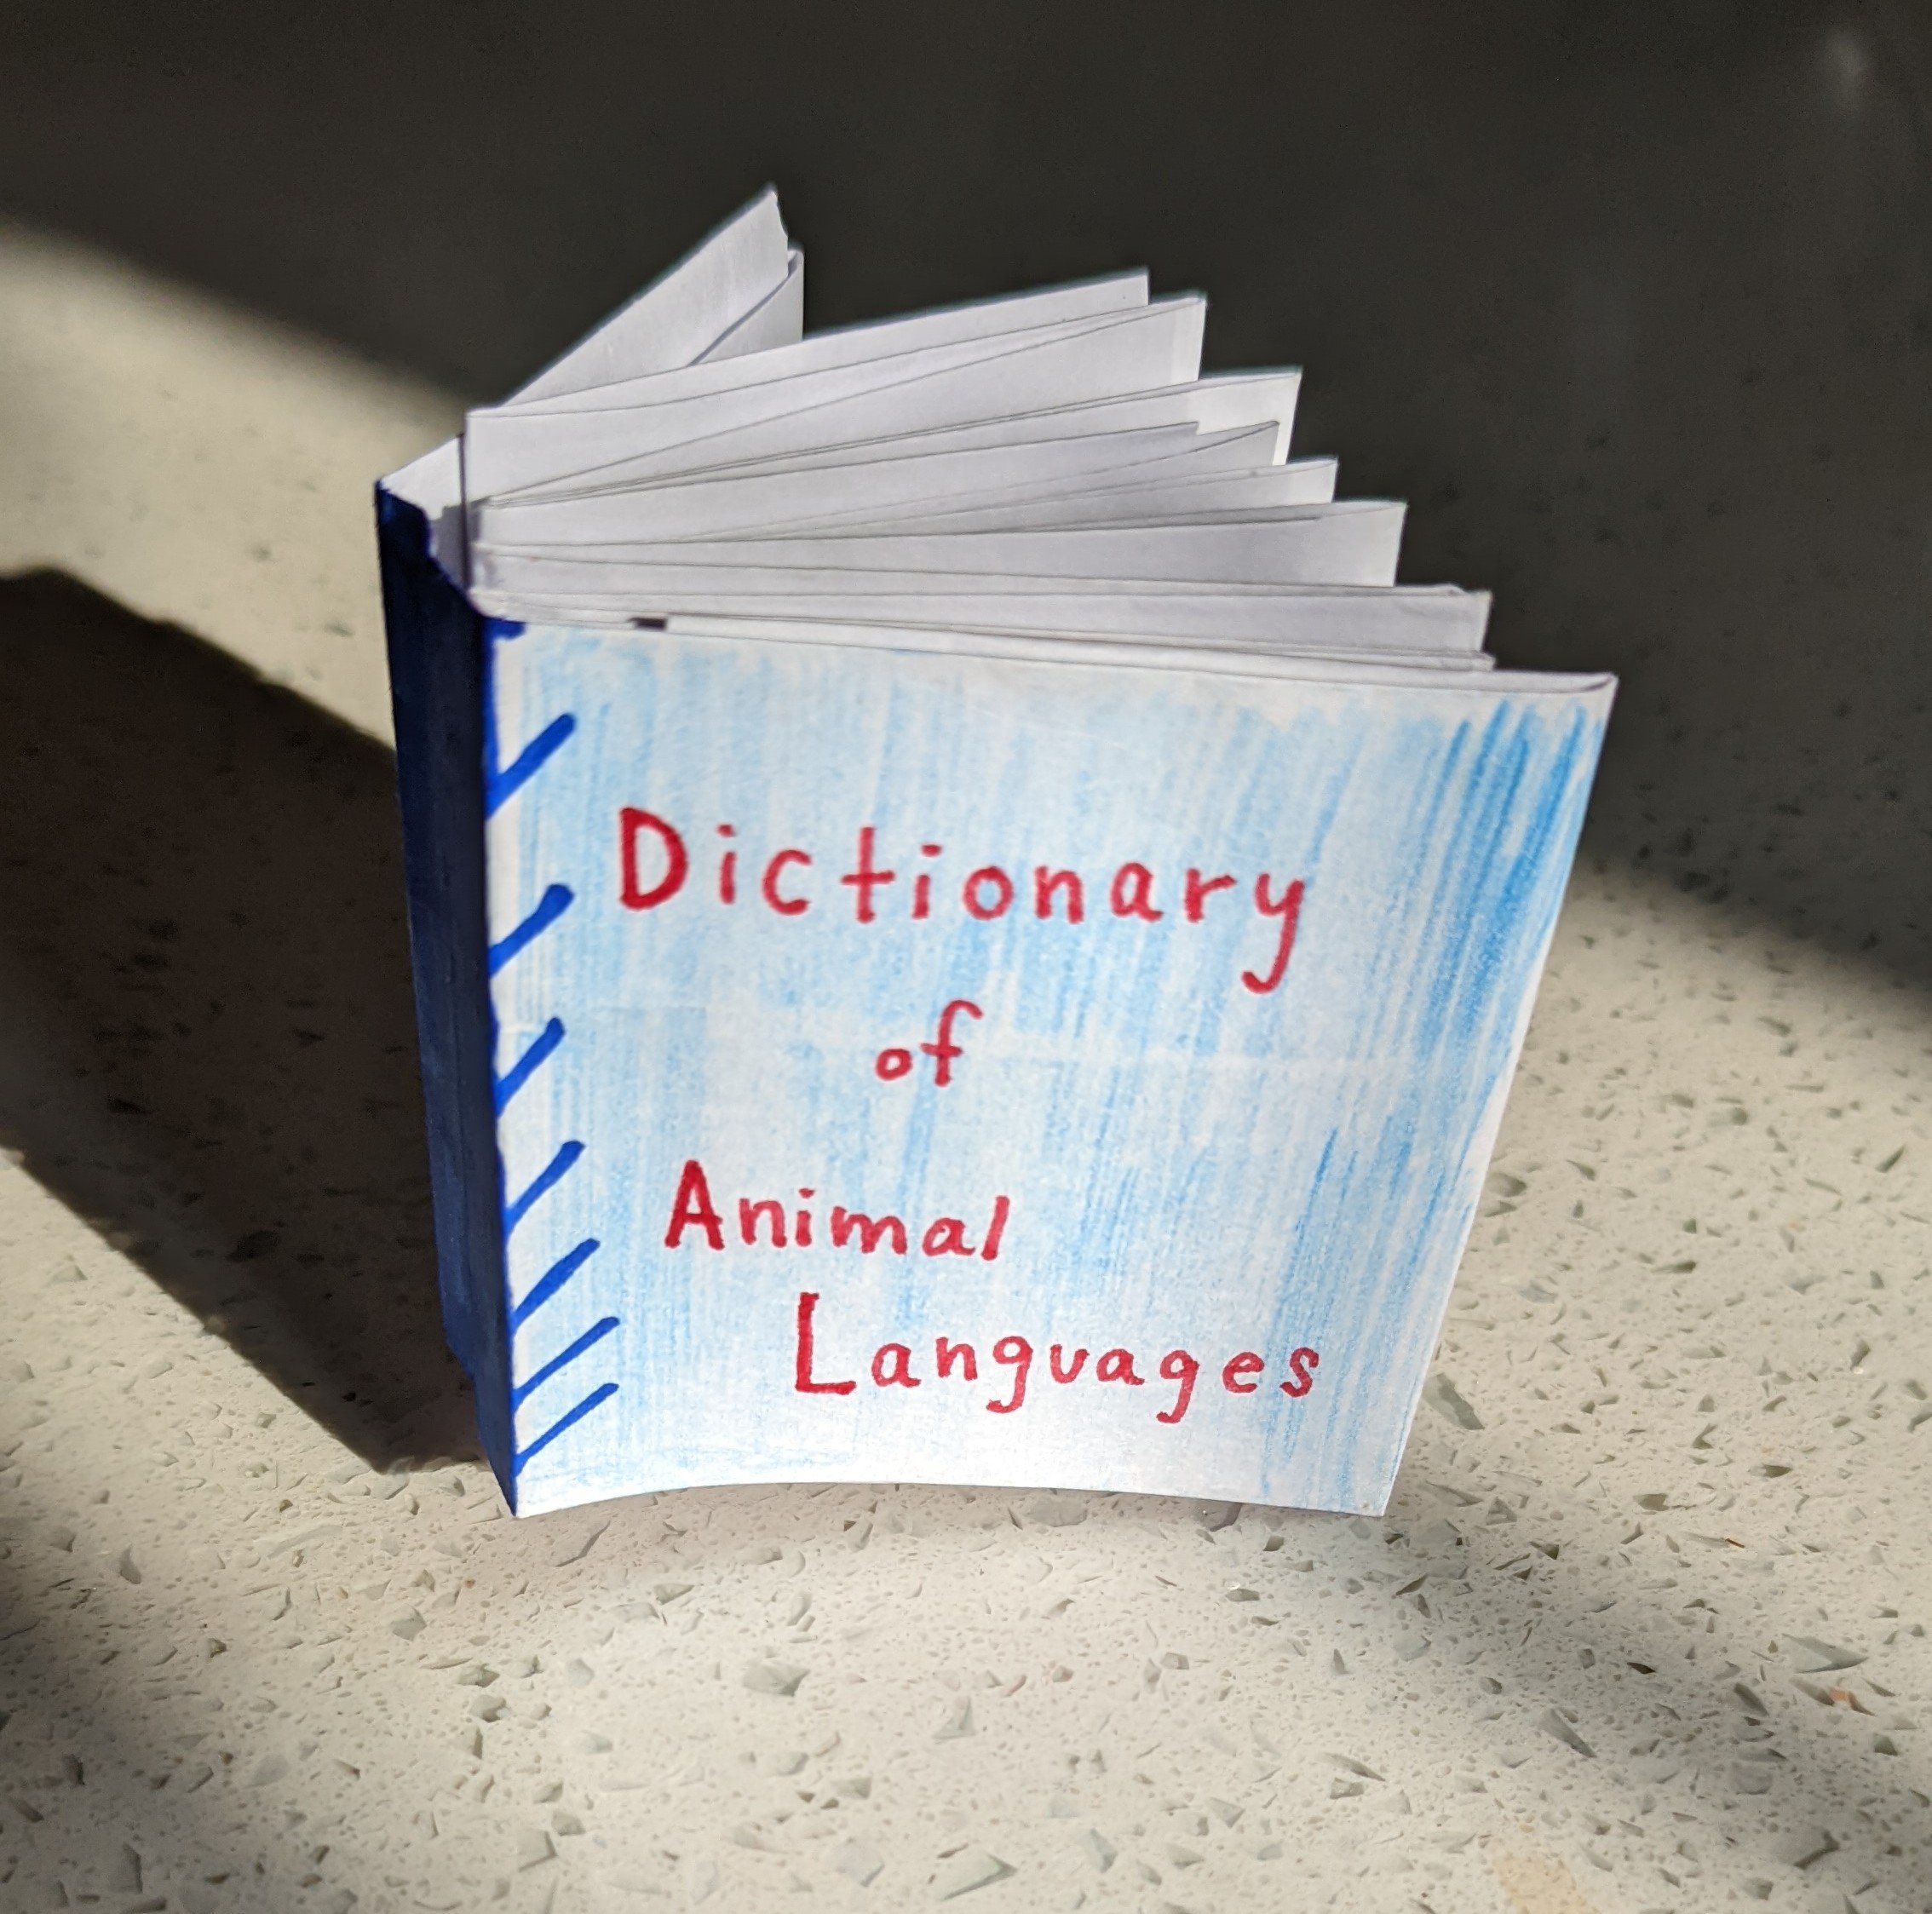 creative-prompts_write-a-dictionary-of-animal-languages_dictionary-book-byRebecca.jpg